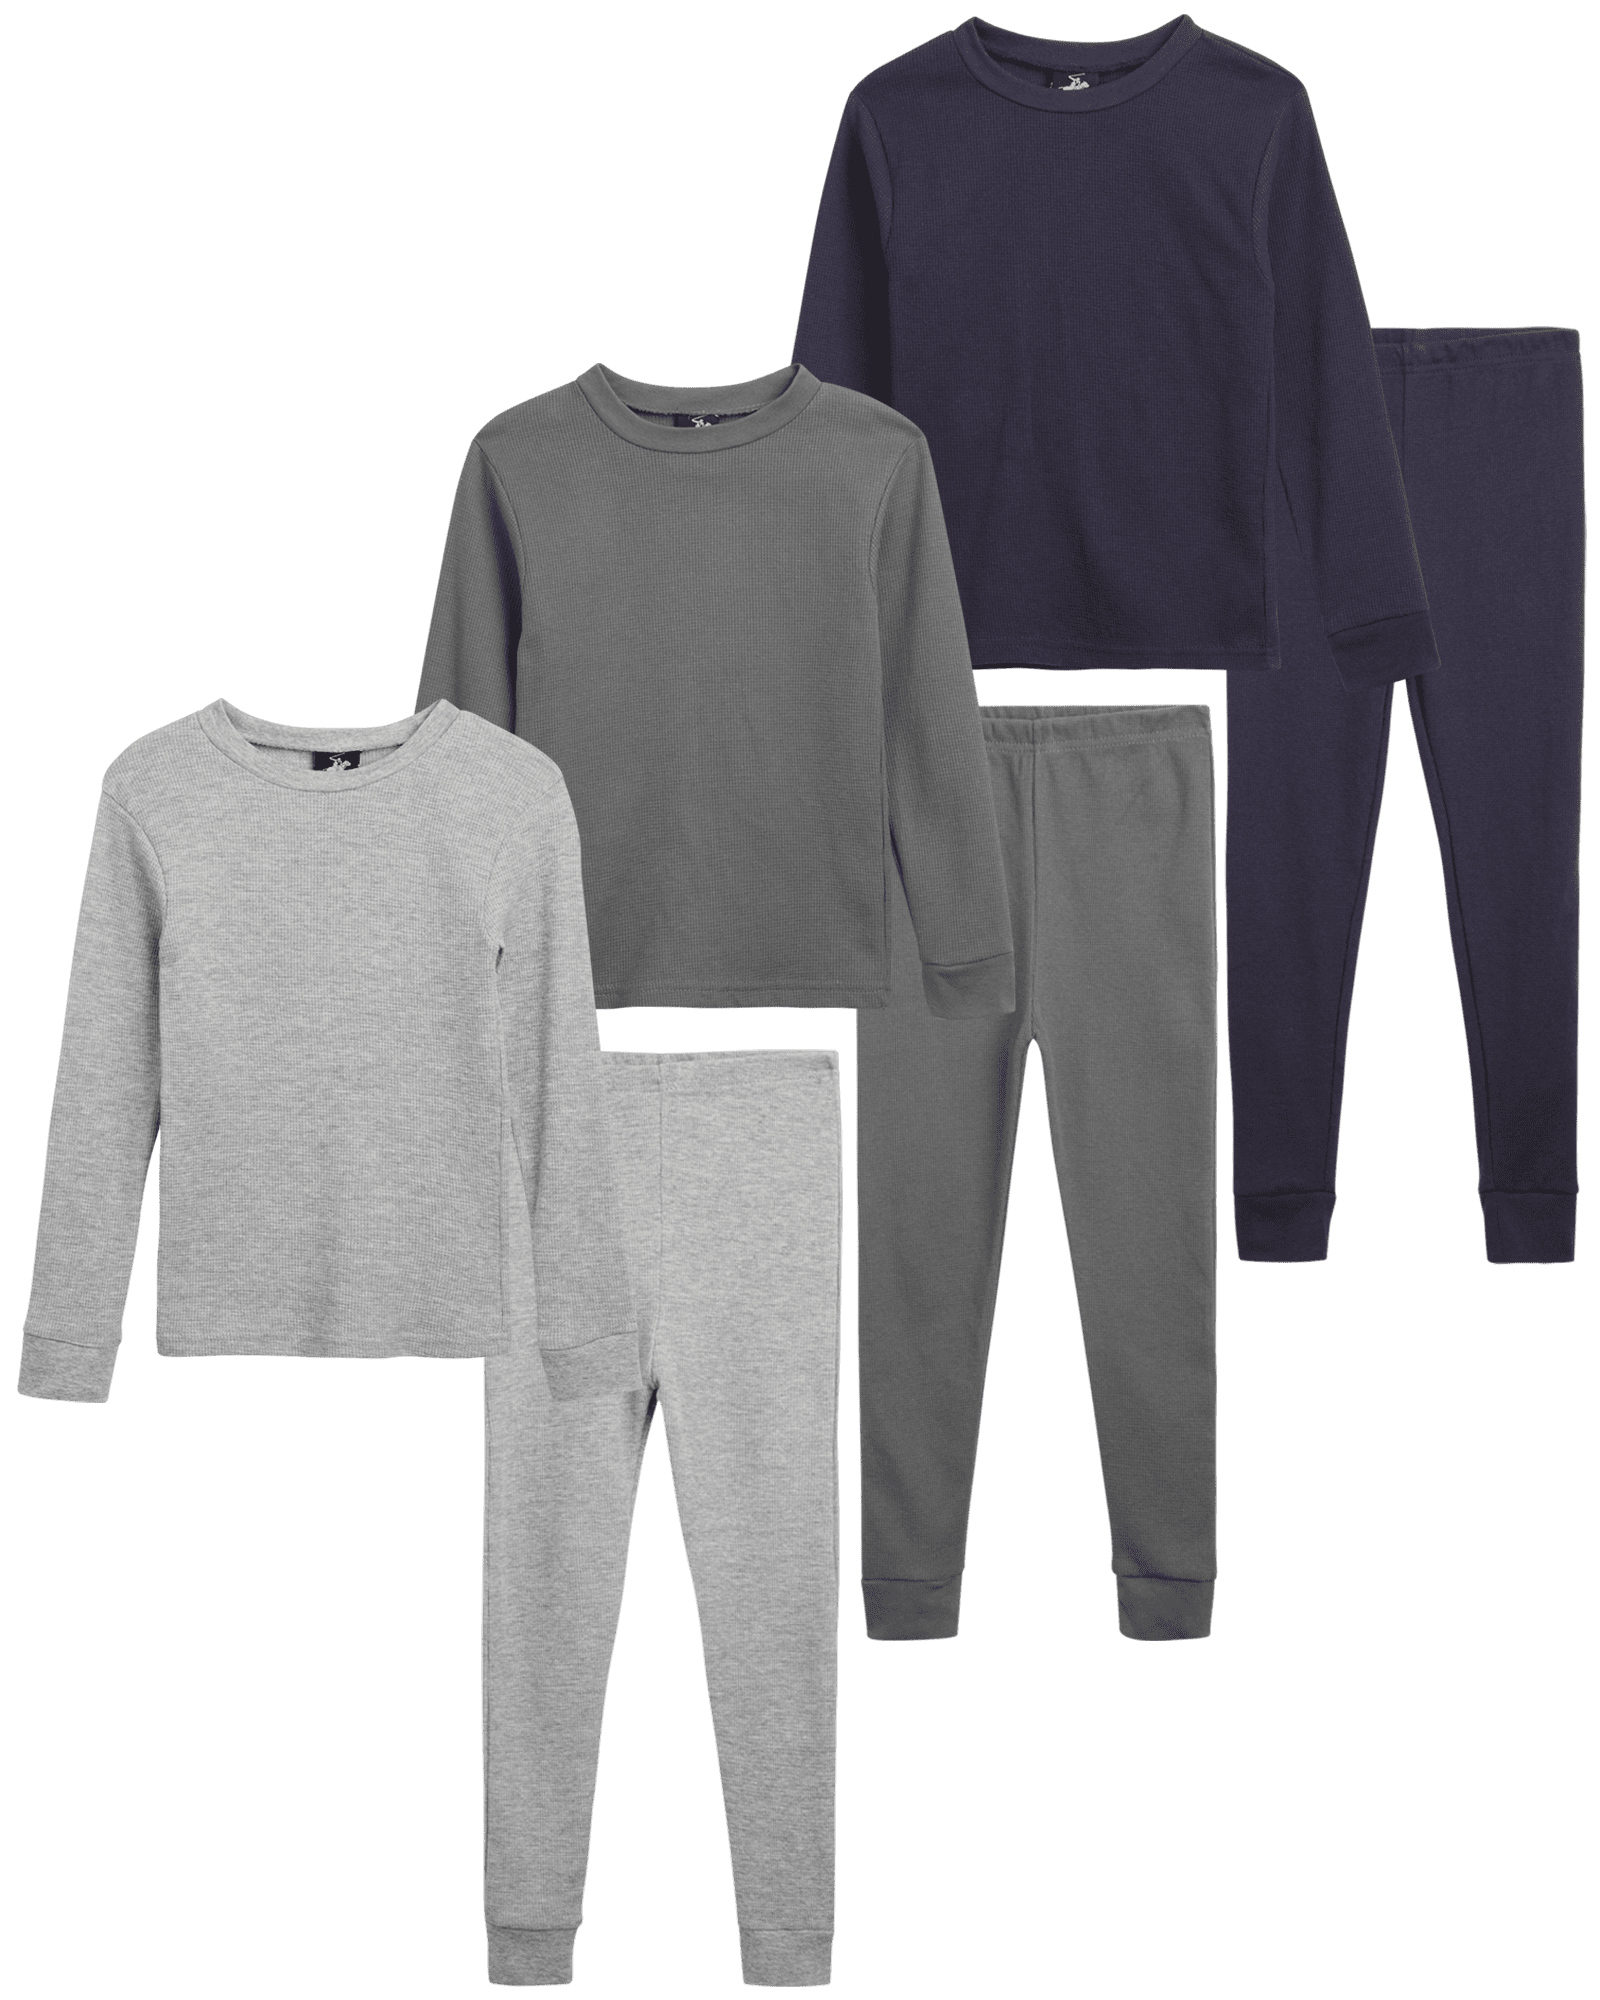 Only Boys Thermal Underwear Set 2 Piece Brushed Fleece Top and Long Johns 2T-16 